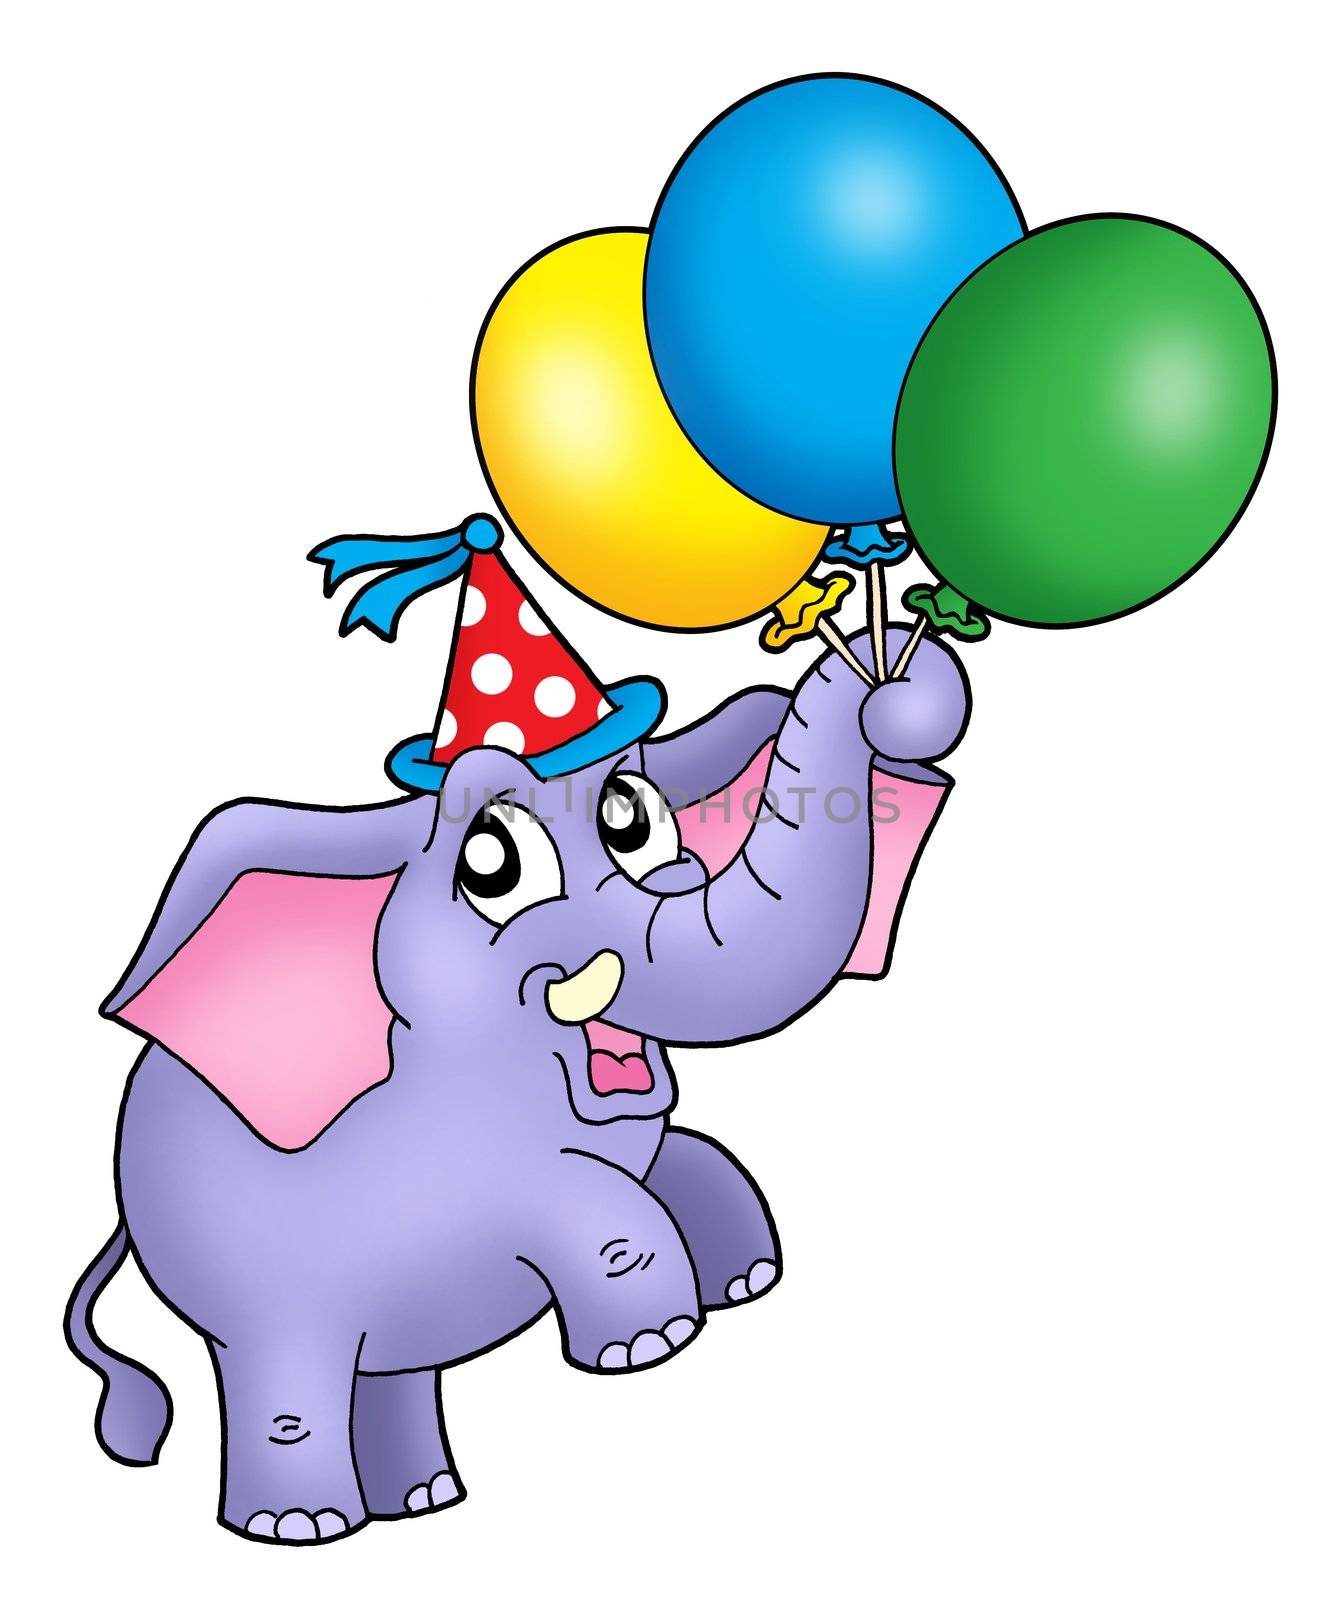 Small elephant with balloons - color illustration.